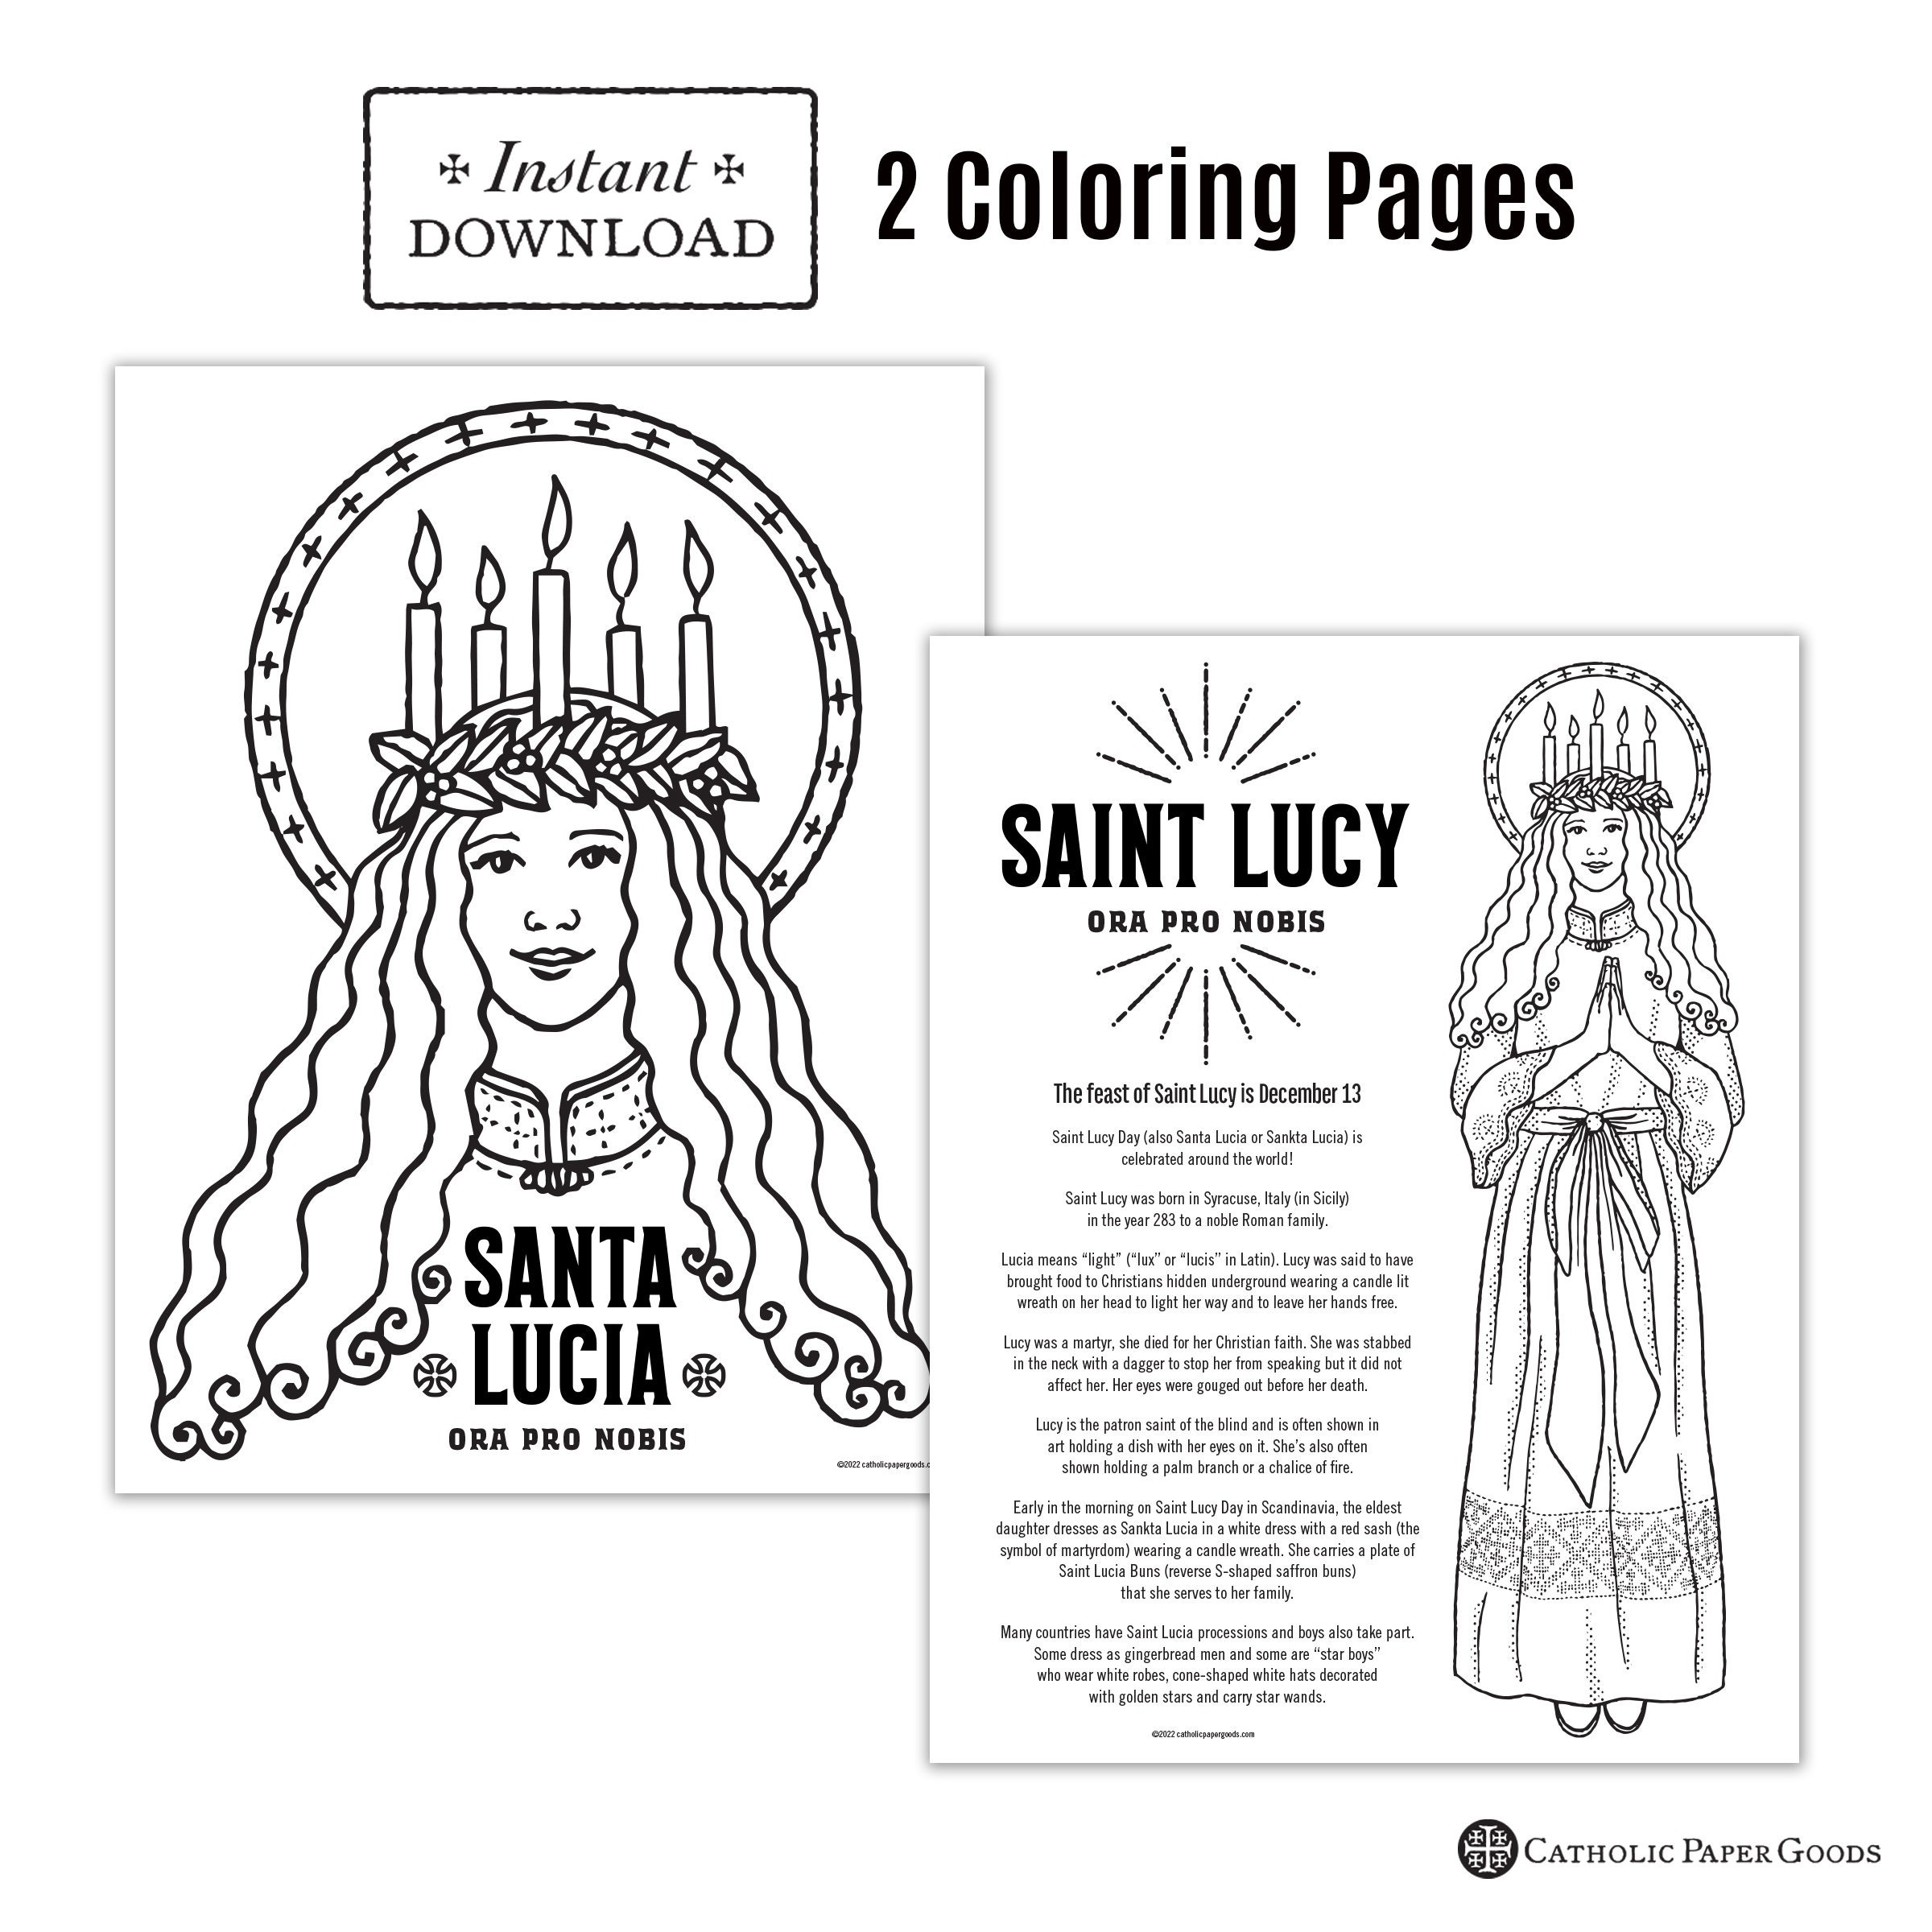 Saint lucy day activity bundle catholic coloring pages printable games answer key printable candle wreath star boy hat santa lucia day